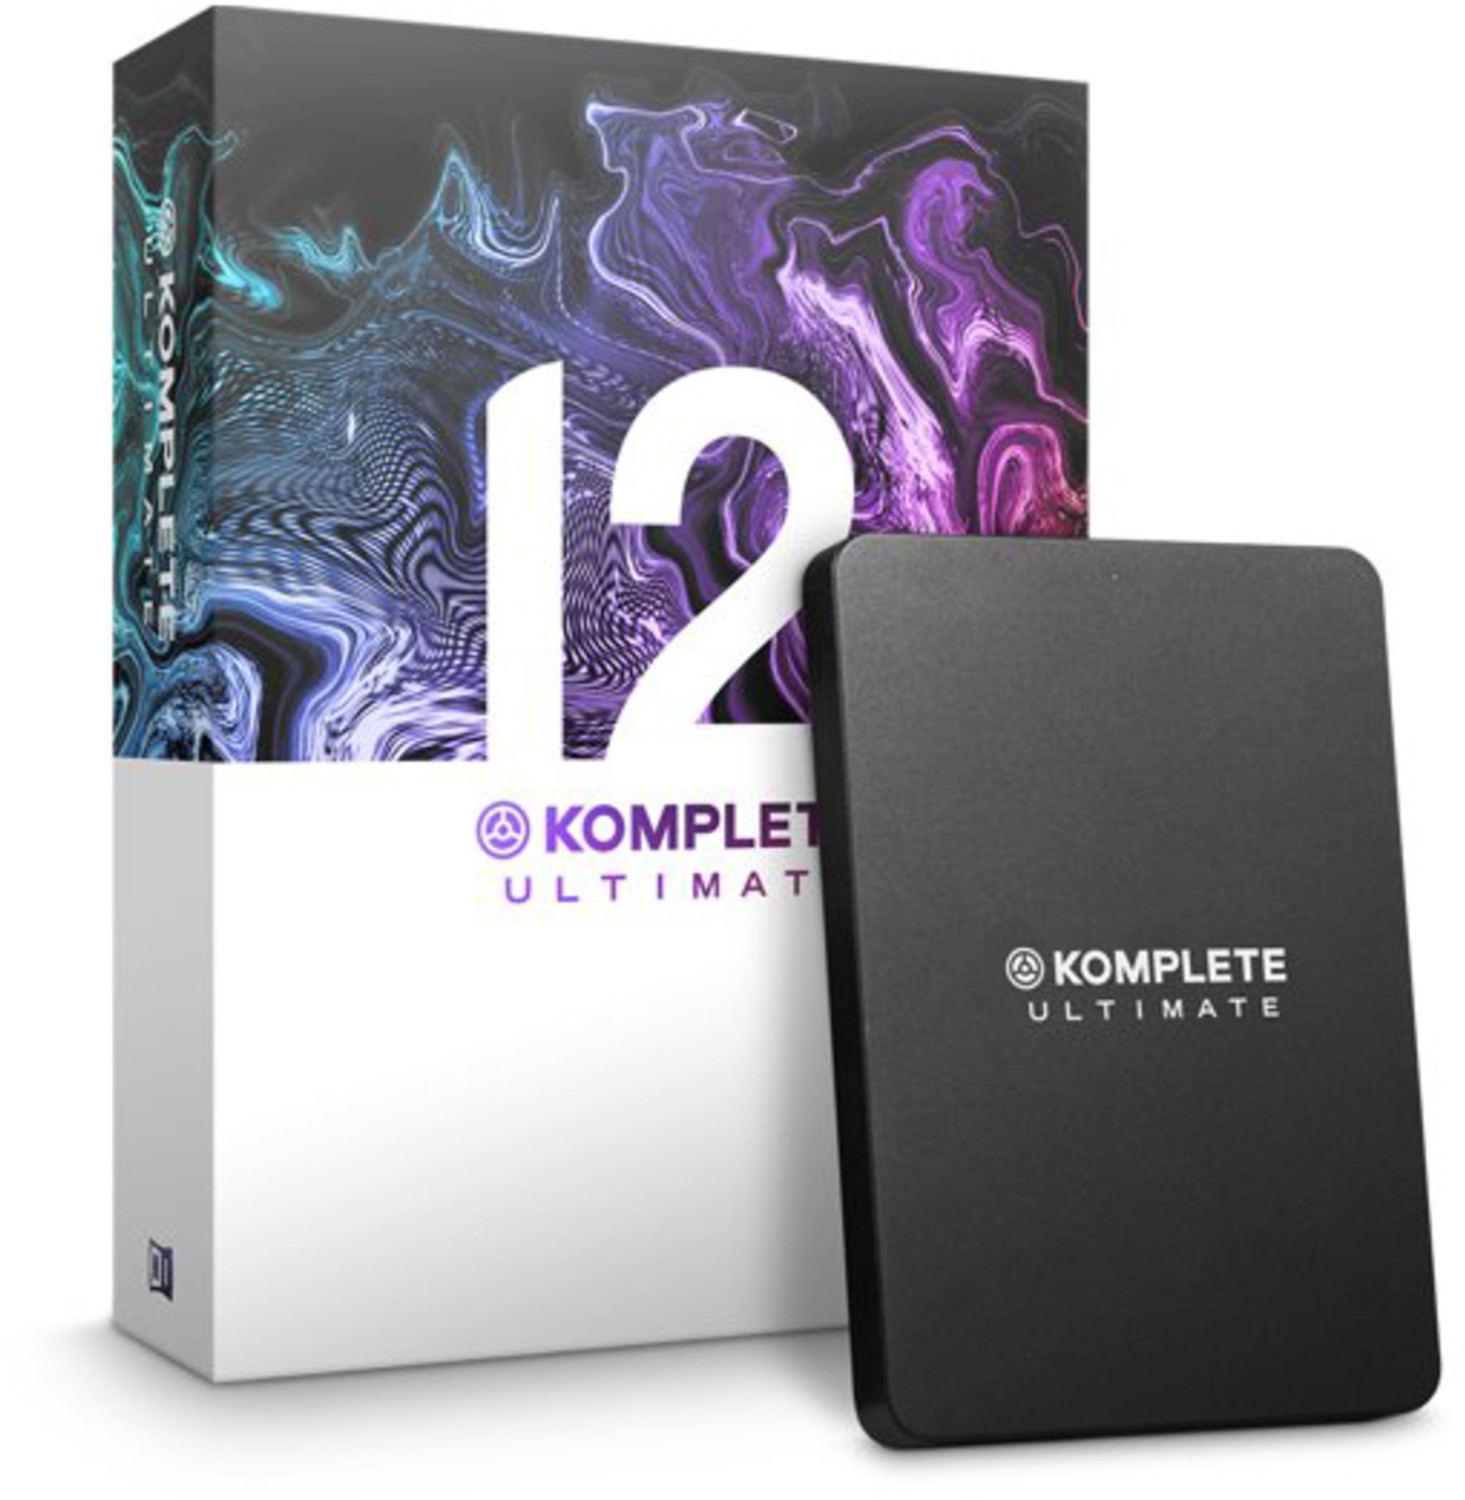 how to install komplete ultimate 11 upgrade